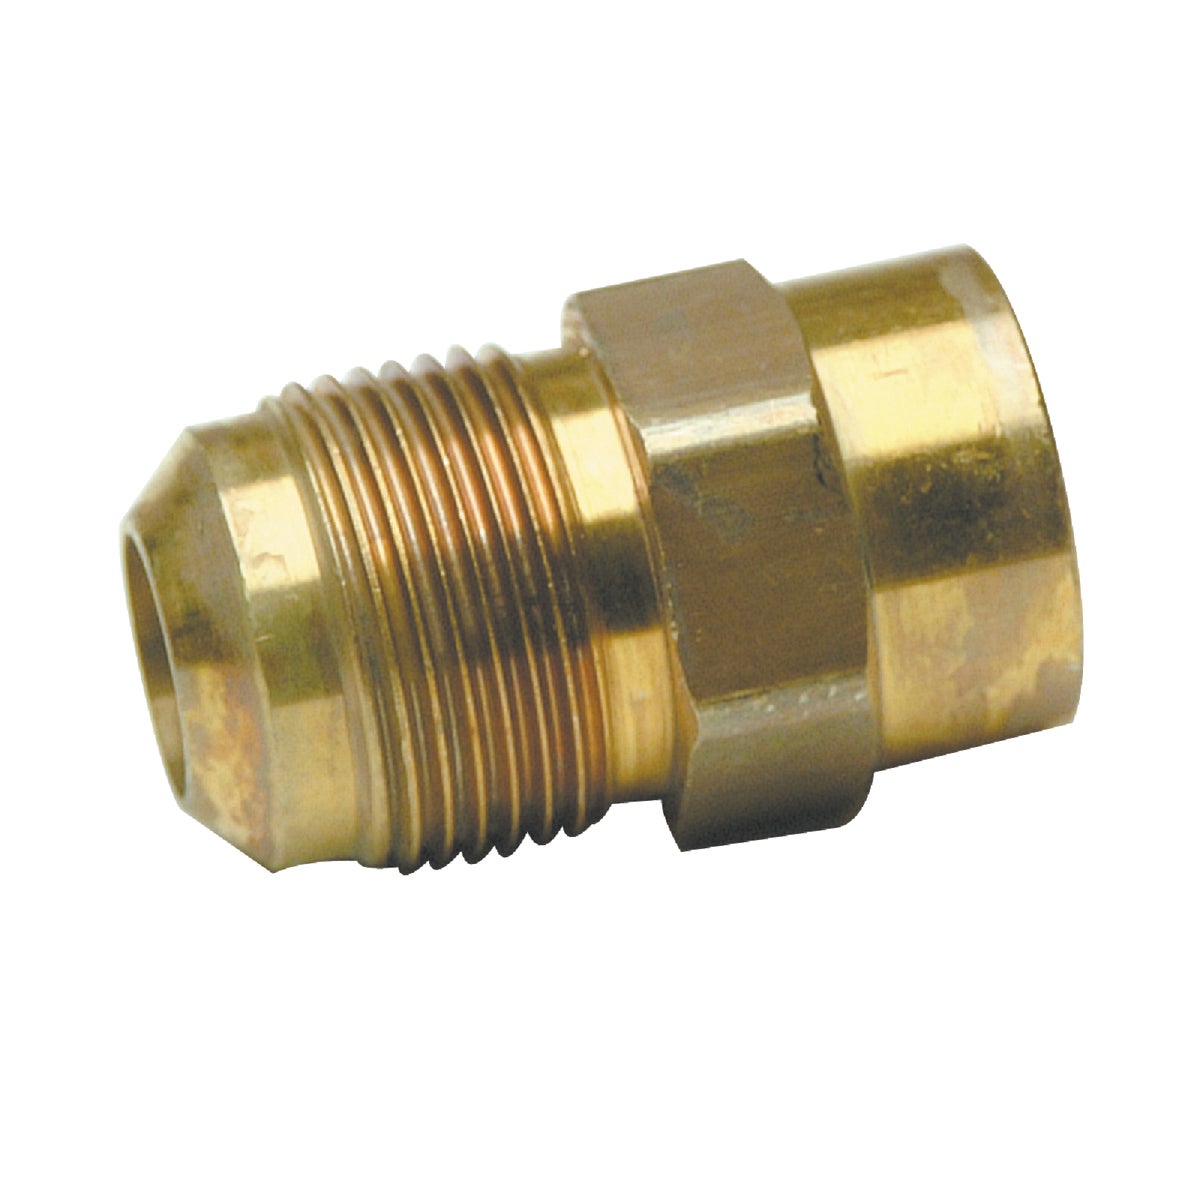 Dormont 5/8 In. OD Male Flare x 1/2 In. FIP Zinc-Plated Carbon Steel Adapter Gas Fitting, Bulk